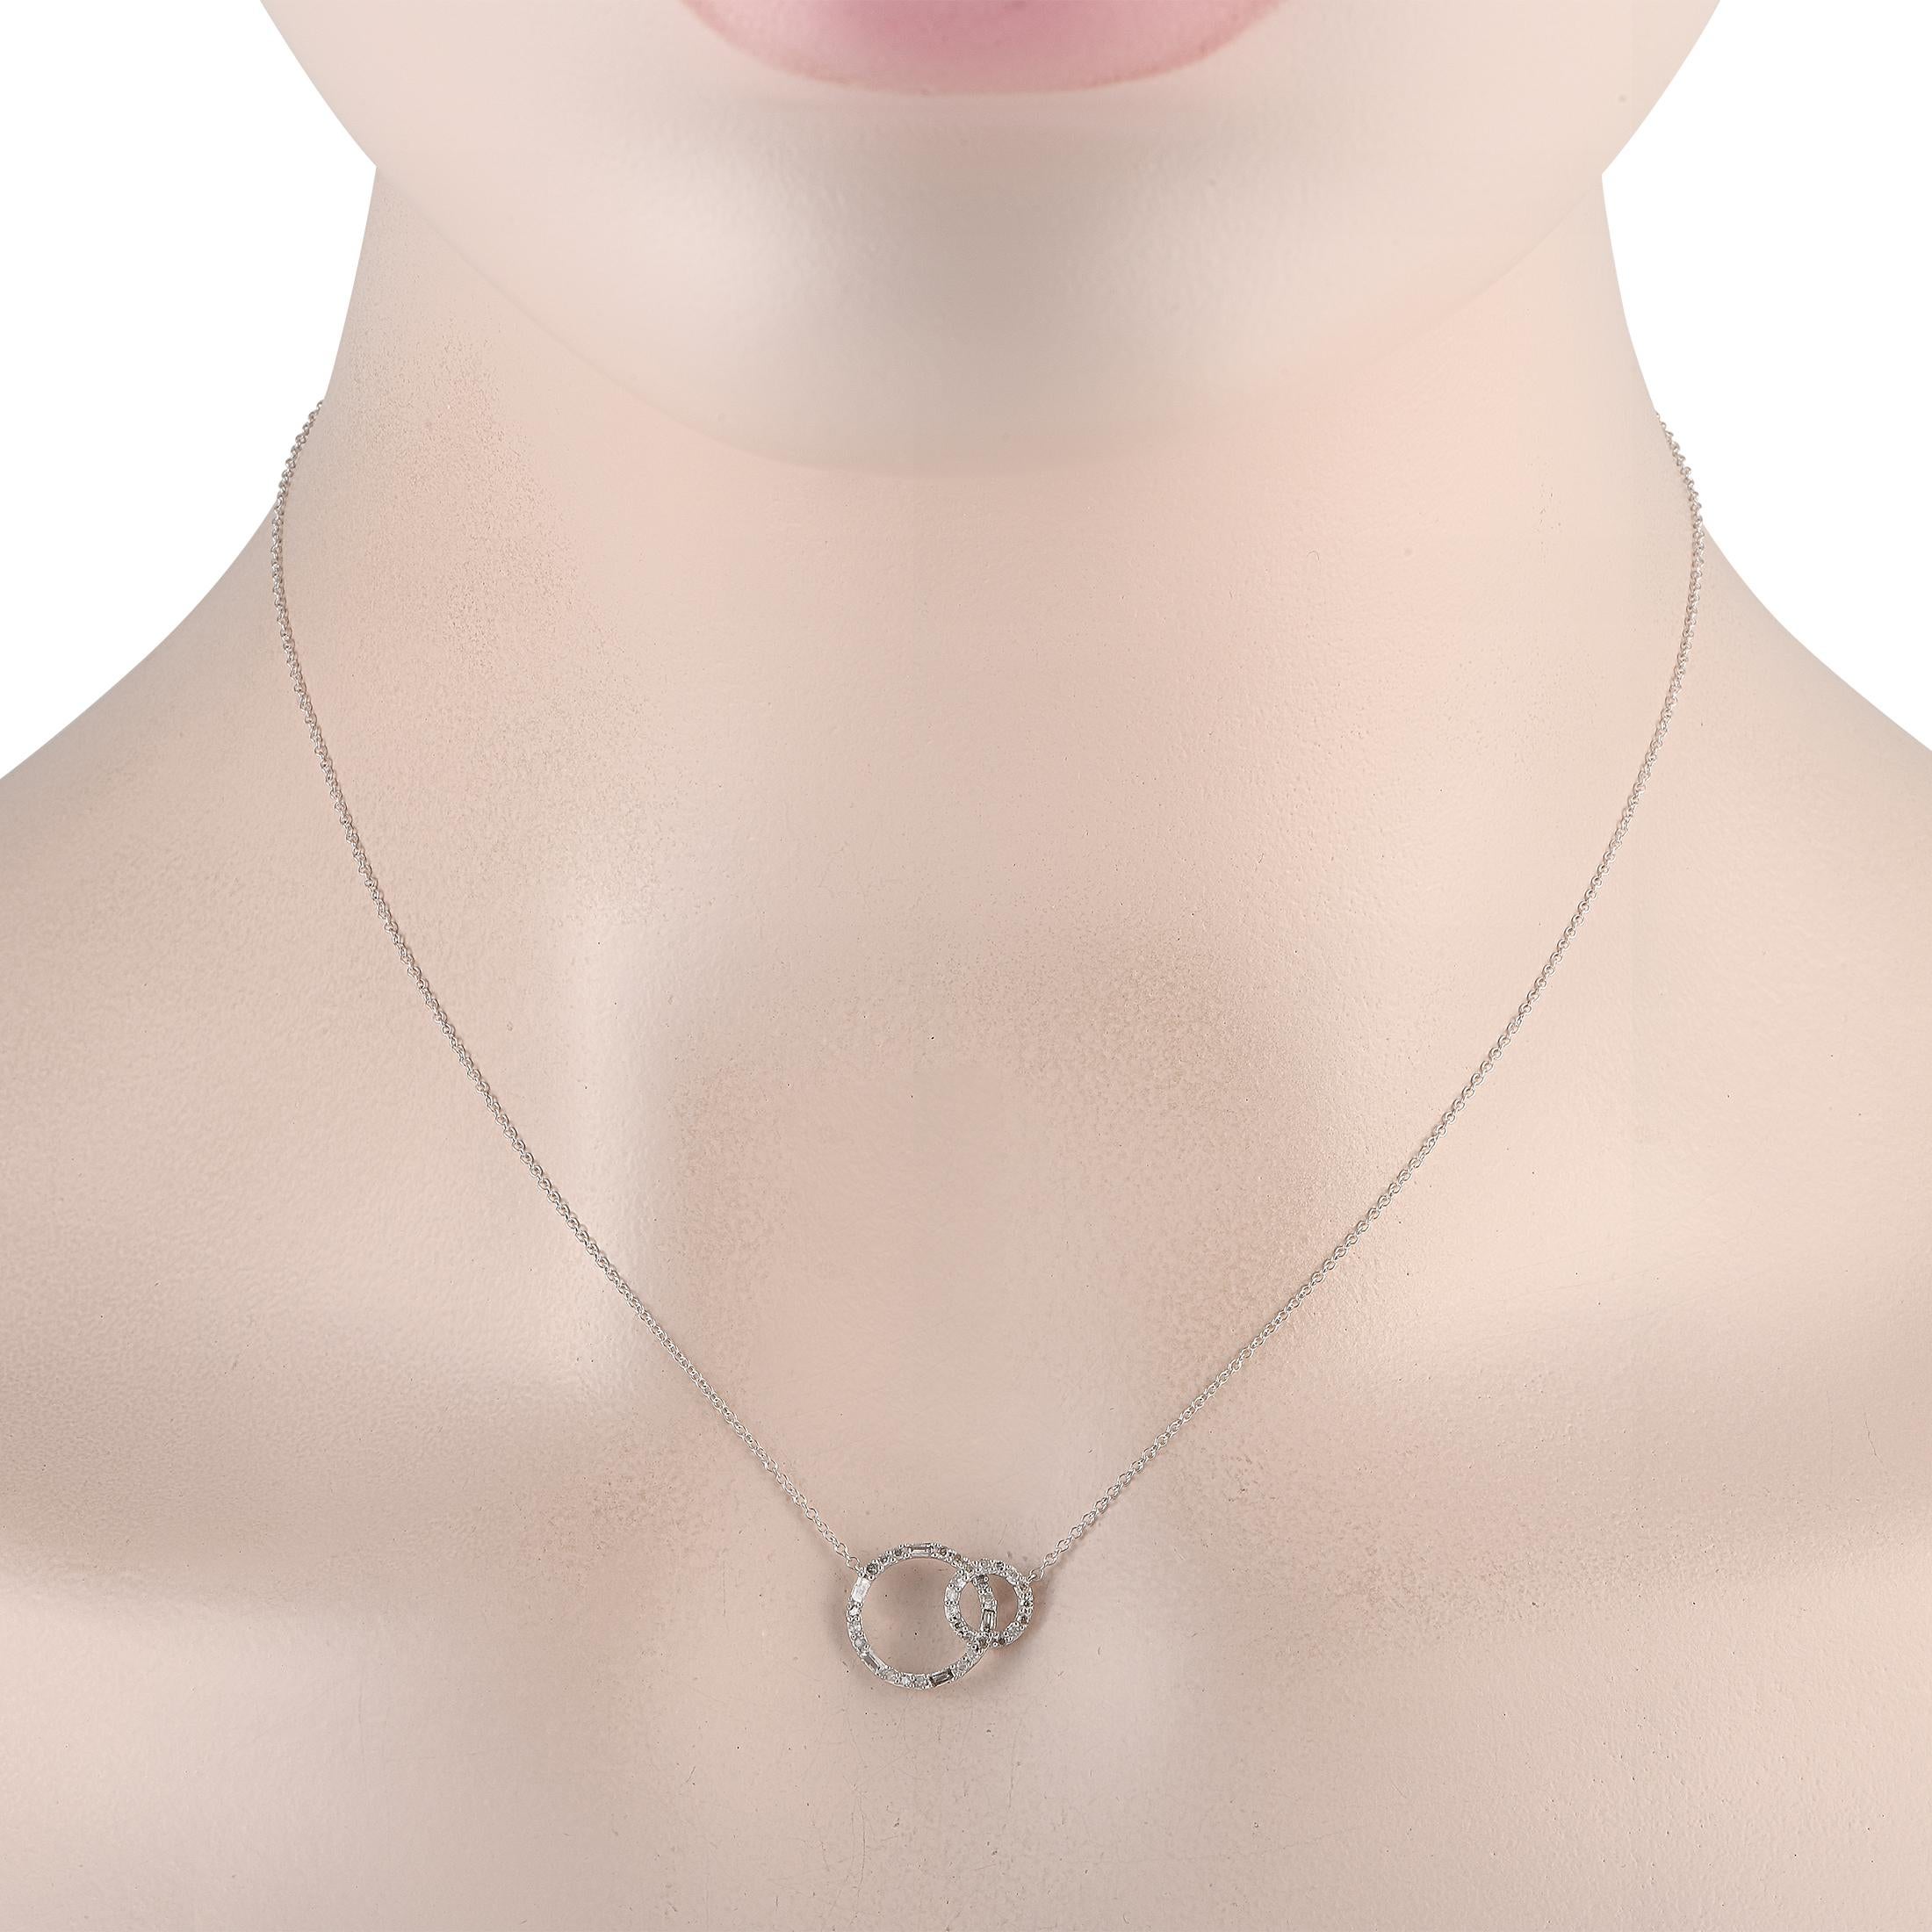 This luxury necklace is ideal for everyday wear. Suspended at the center of a 16 chain, youll find a 14K White Gold pendant that consists of interlocking circles. Diamonds with a total weight of 0.25 carats allow it to effortlessly reflect light